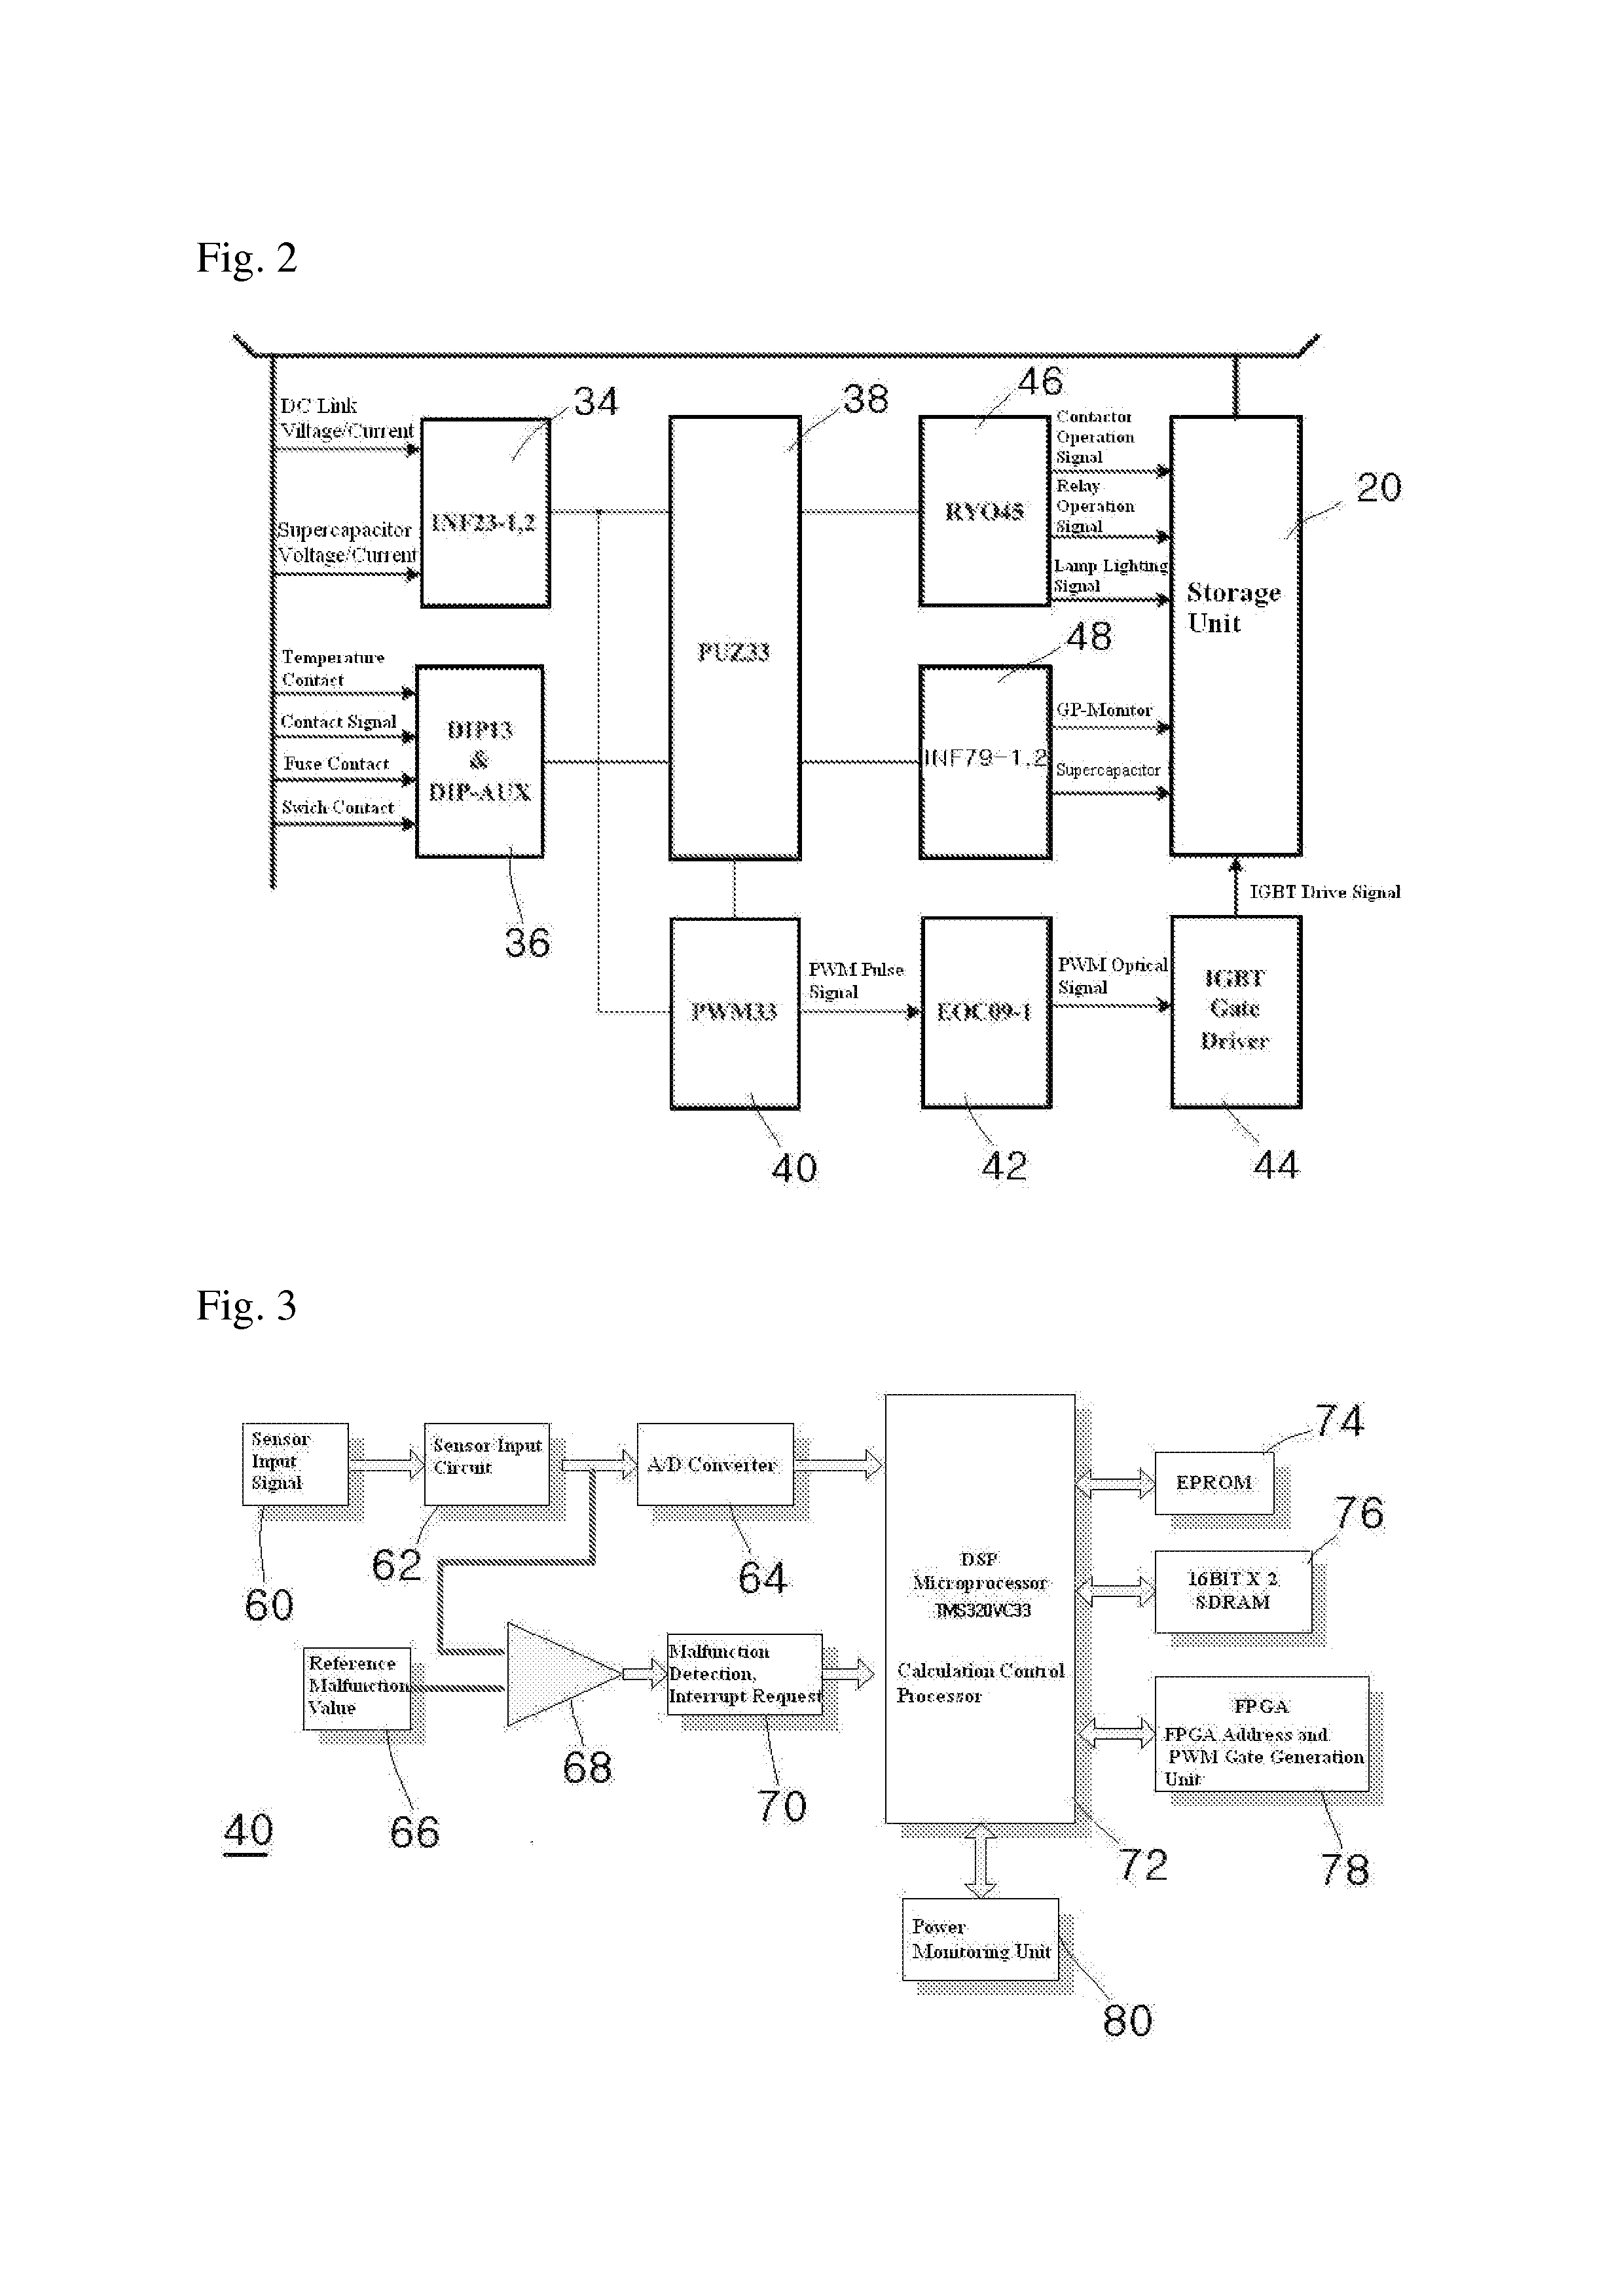 Energy Storage Apparatus for Railway Vehicles by Adopting a Bidirectional DC-DC Converter